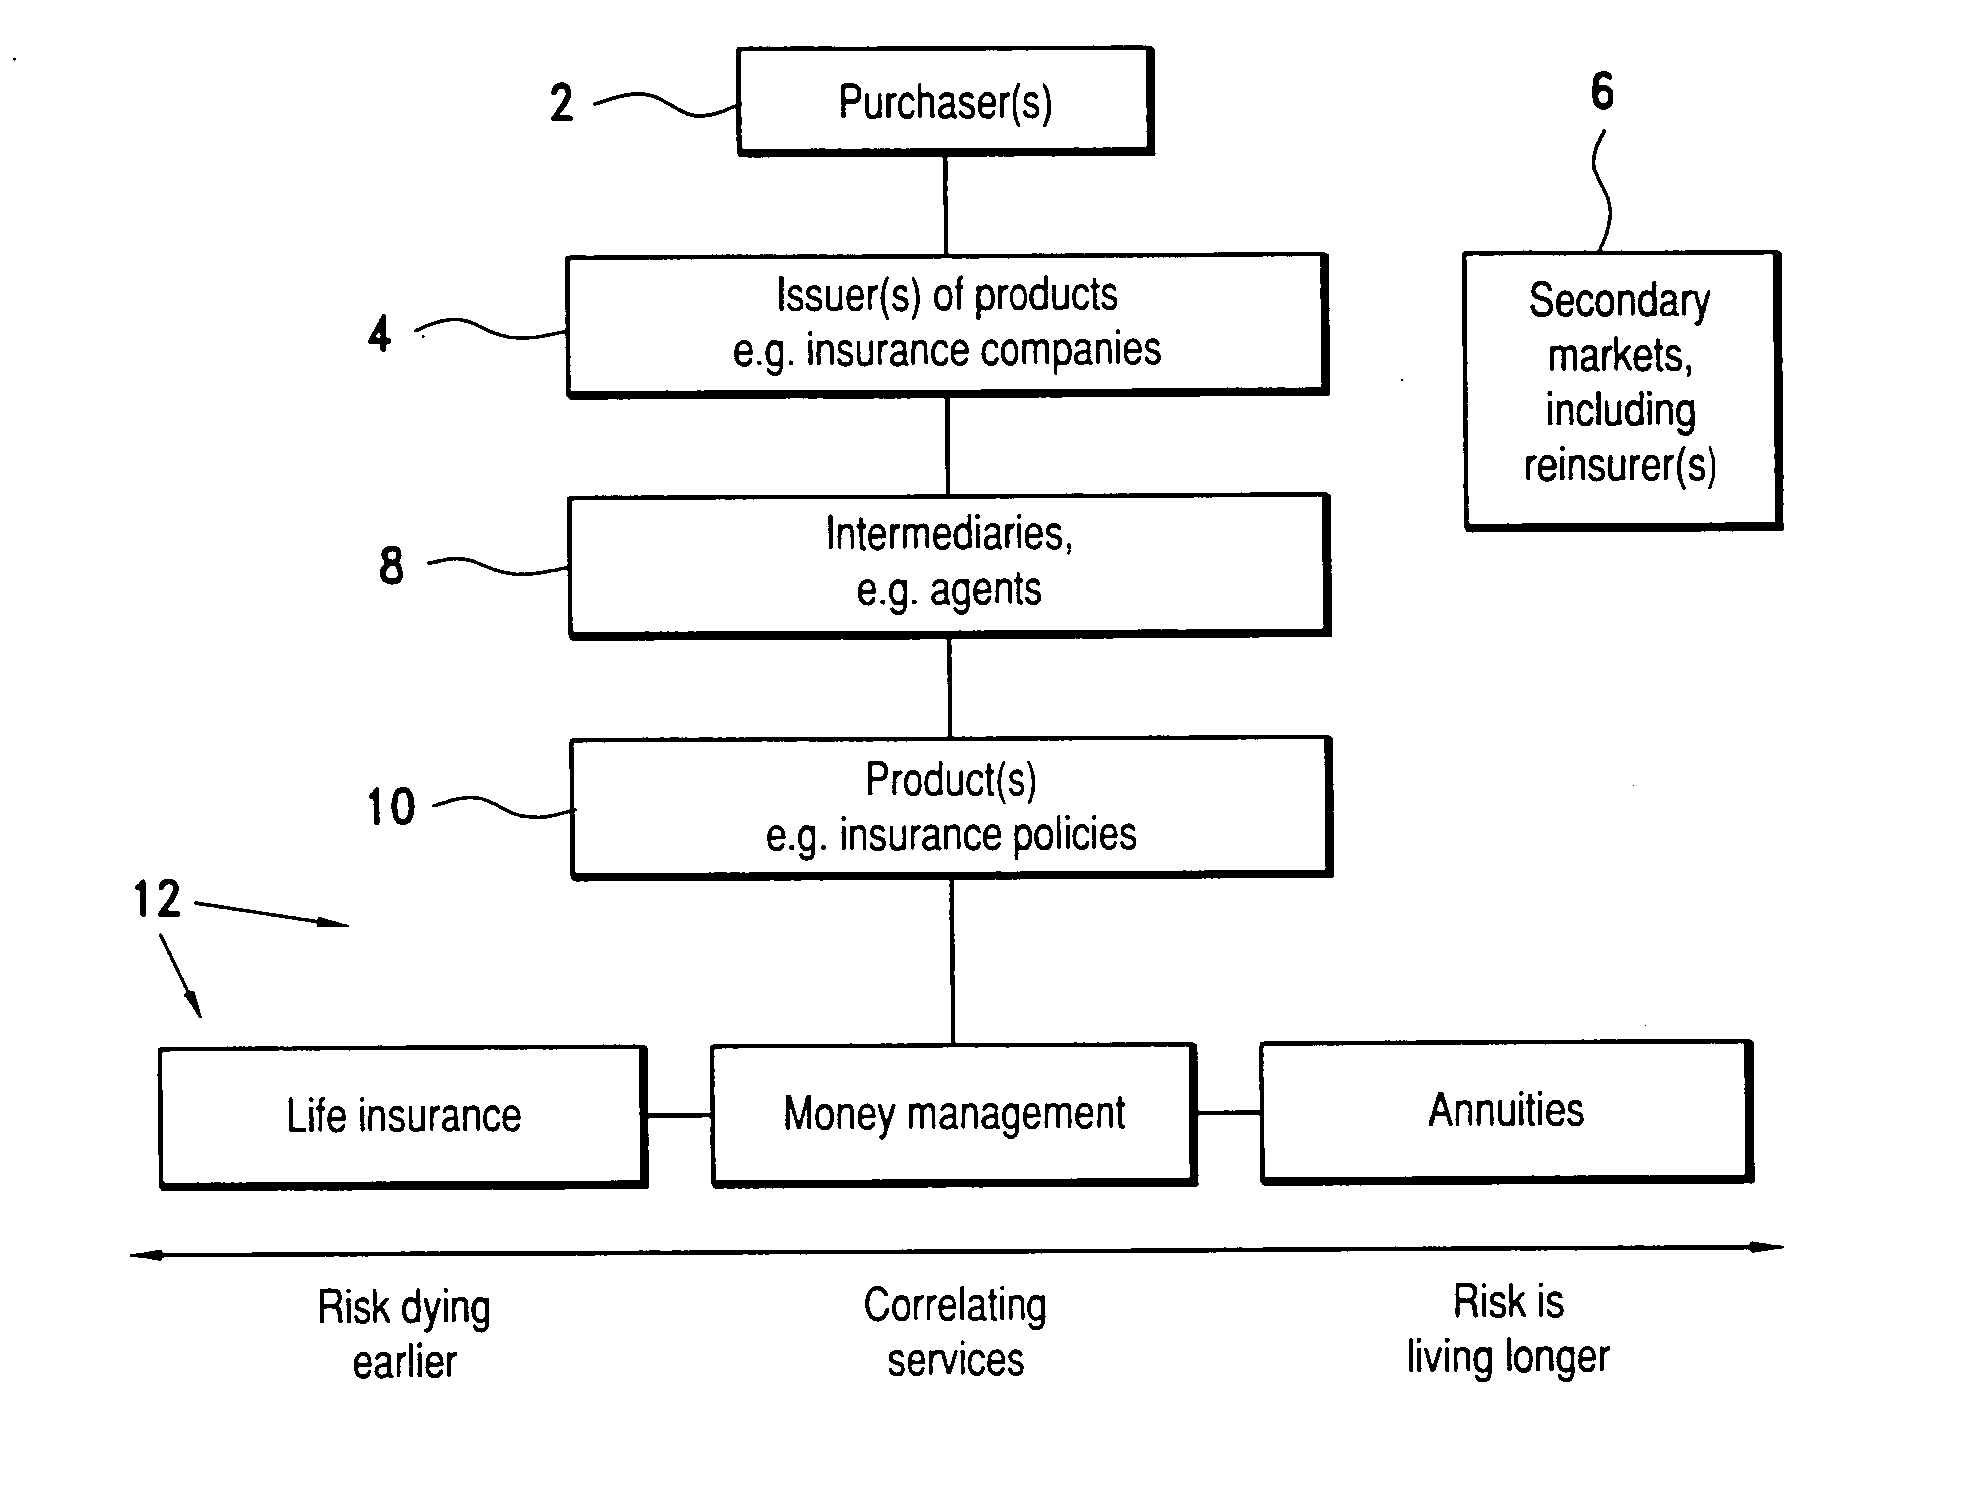 Method of purchasing a product to avoid adverse selection